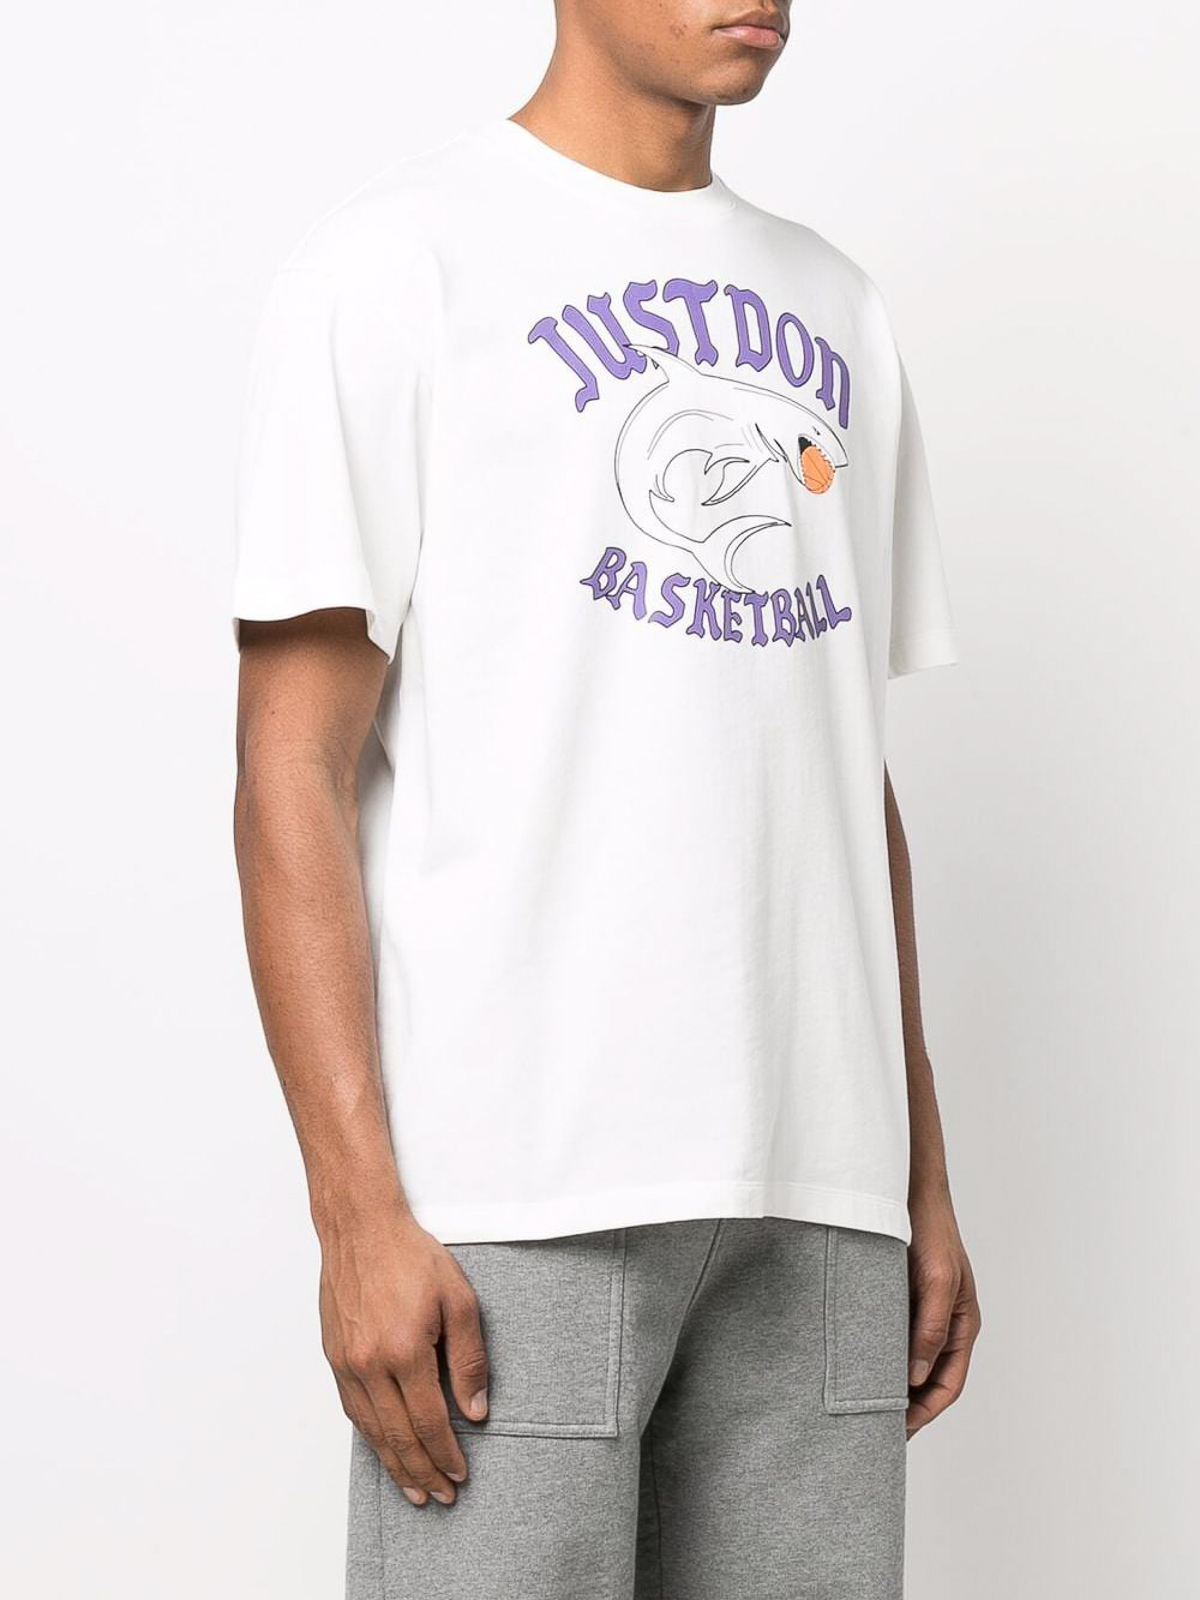 Just Don Tシャツ - 白